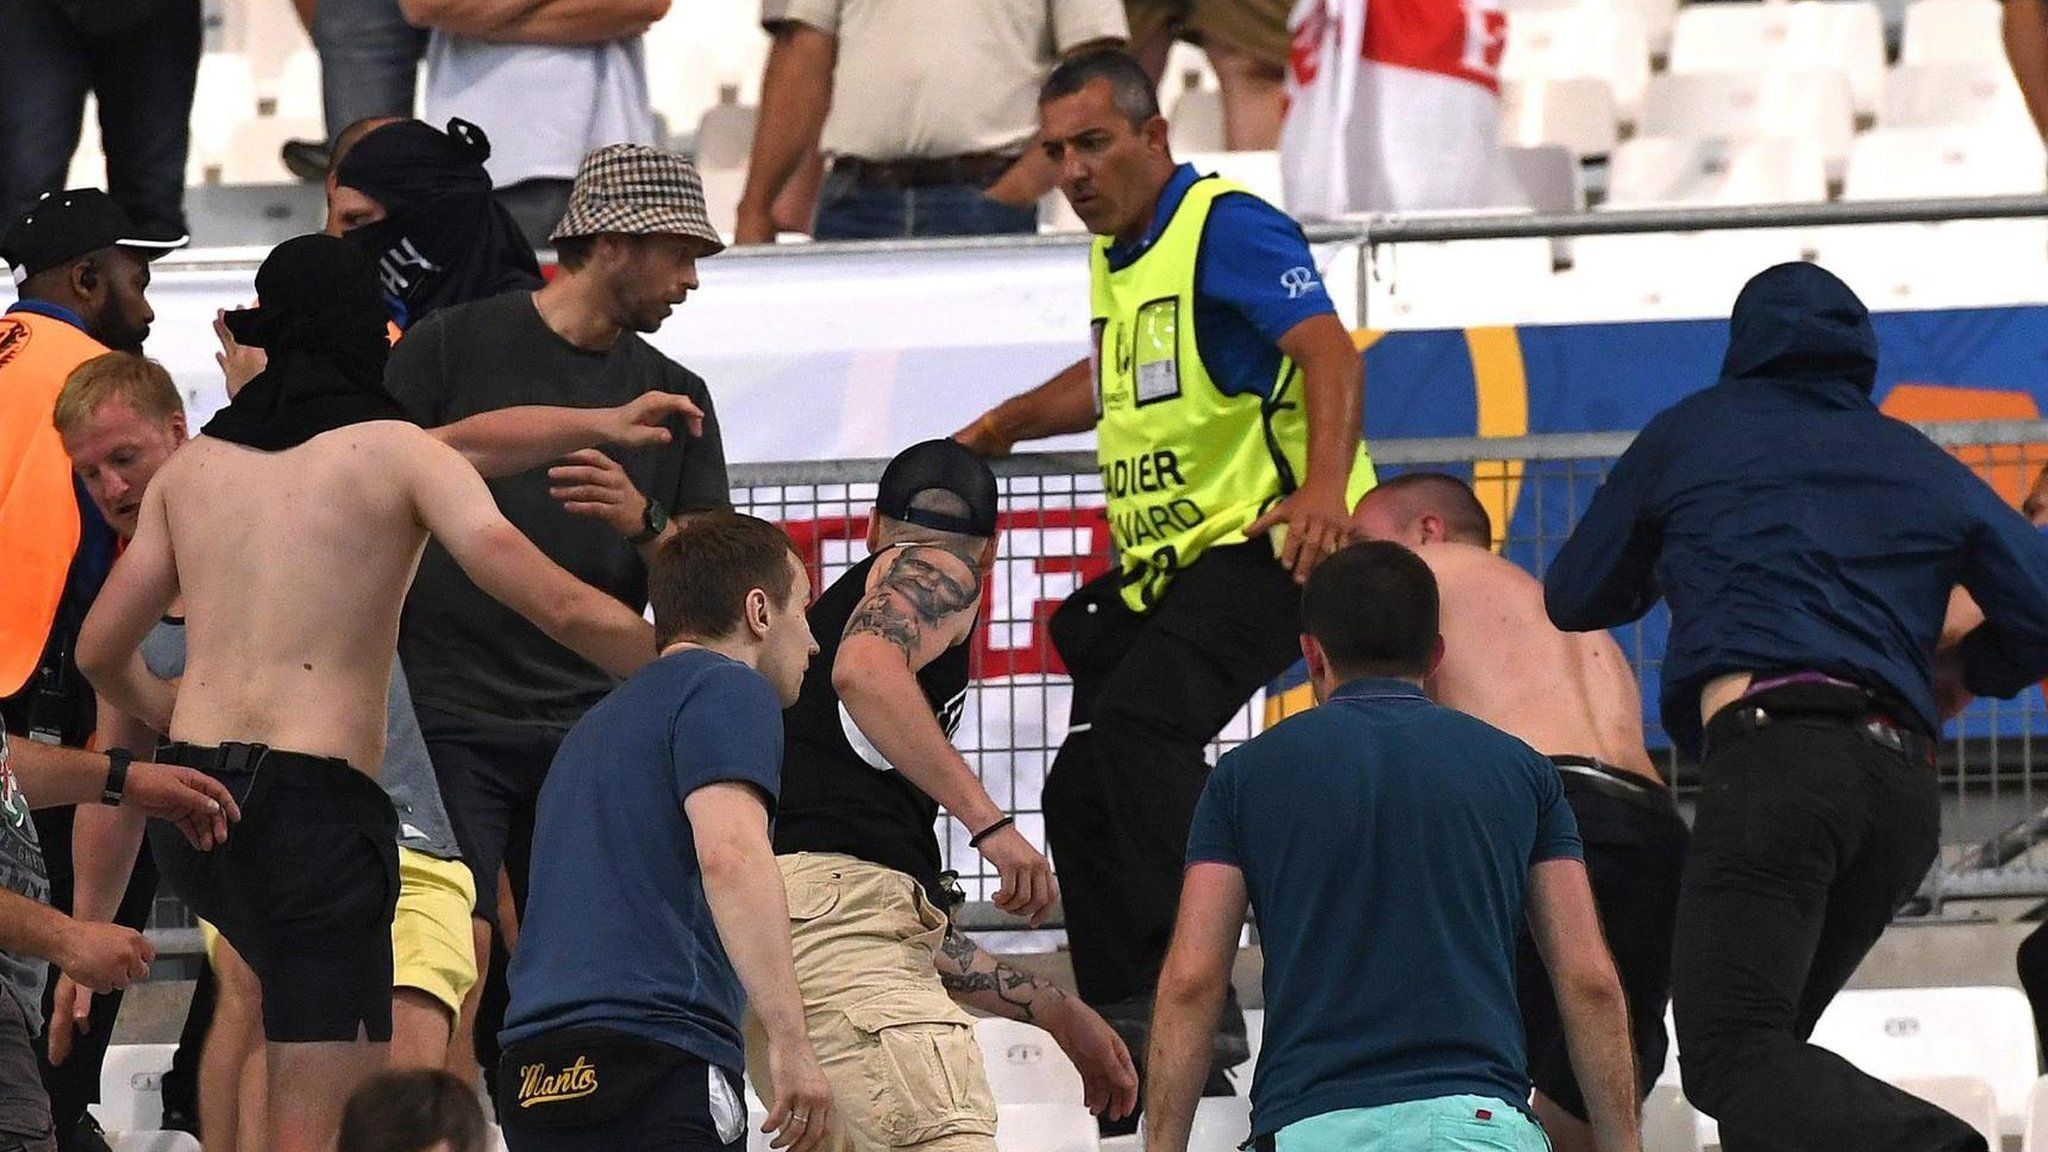 Supporters clash in the stands after England-Russia match